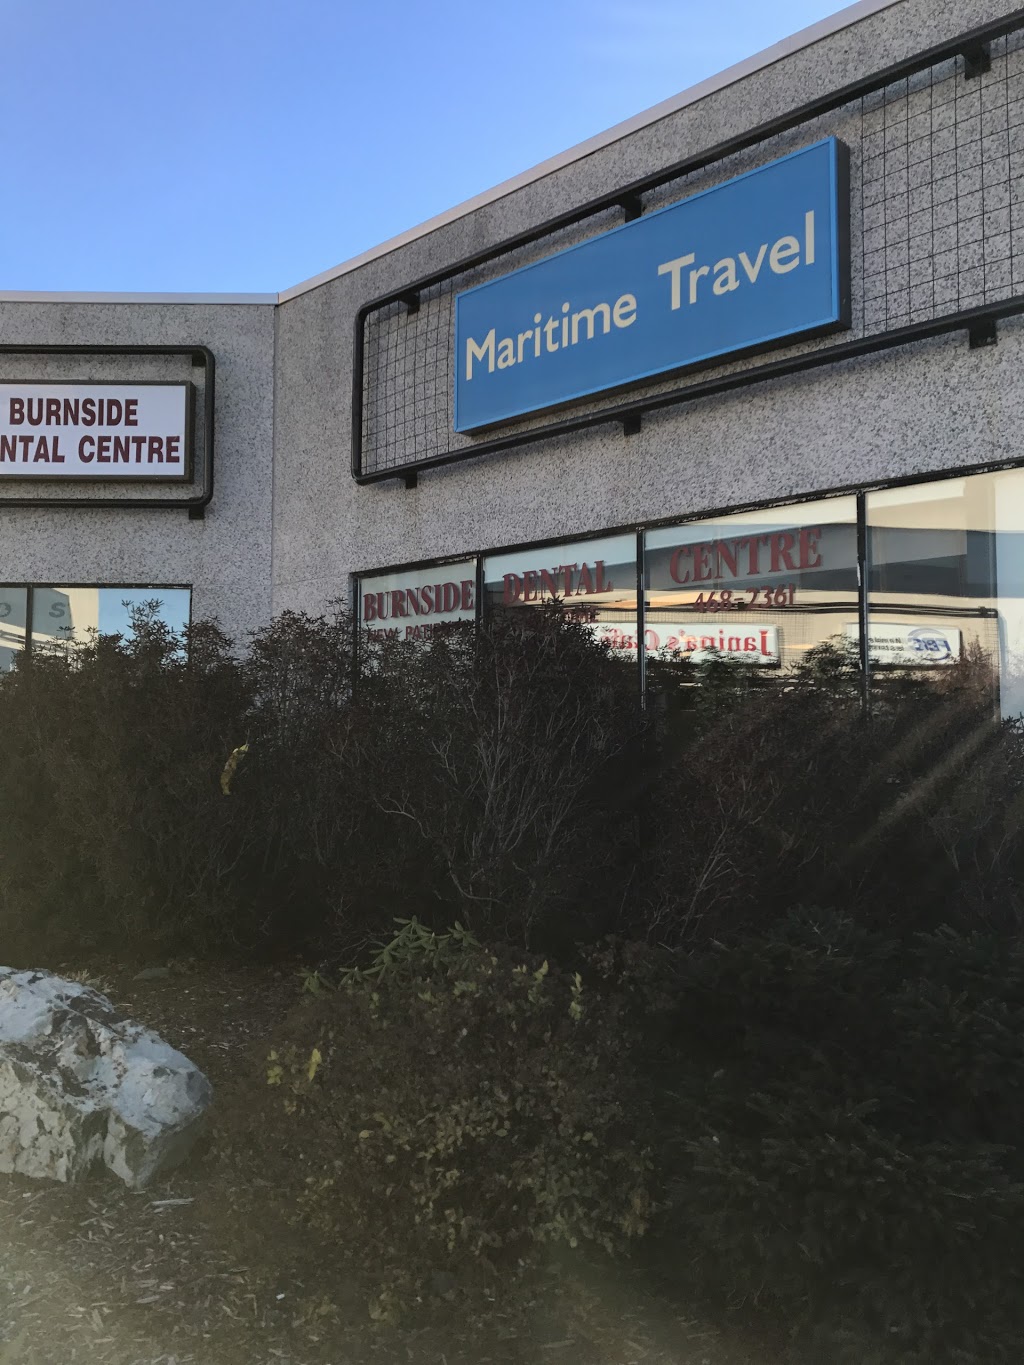 Maritime Travel | travel agency | 202 Brownlow Ave, Dartmouth, NS B3B 1T5, Canada | 9024688747 OR +1 902-468-8747